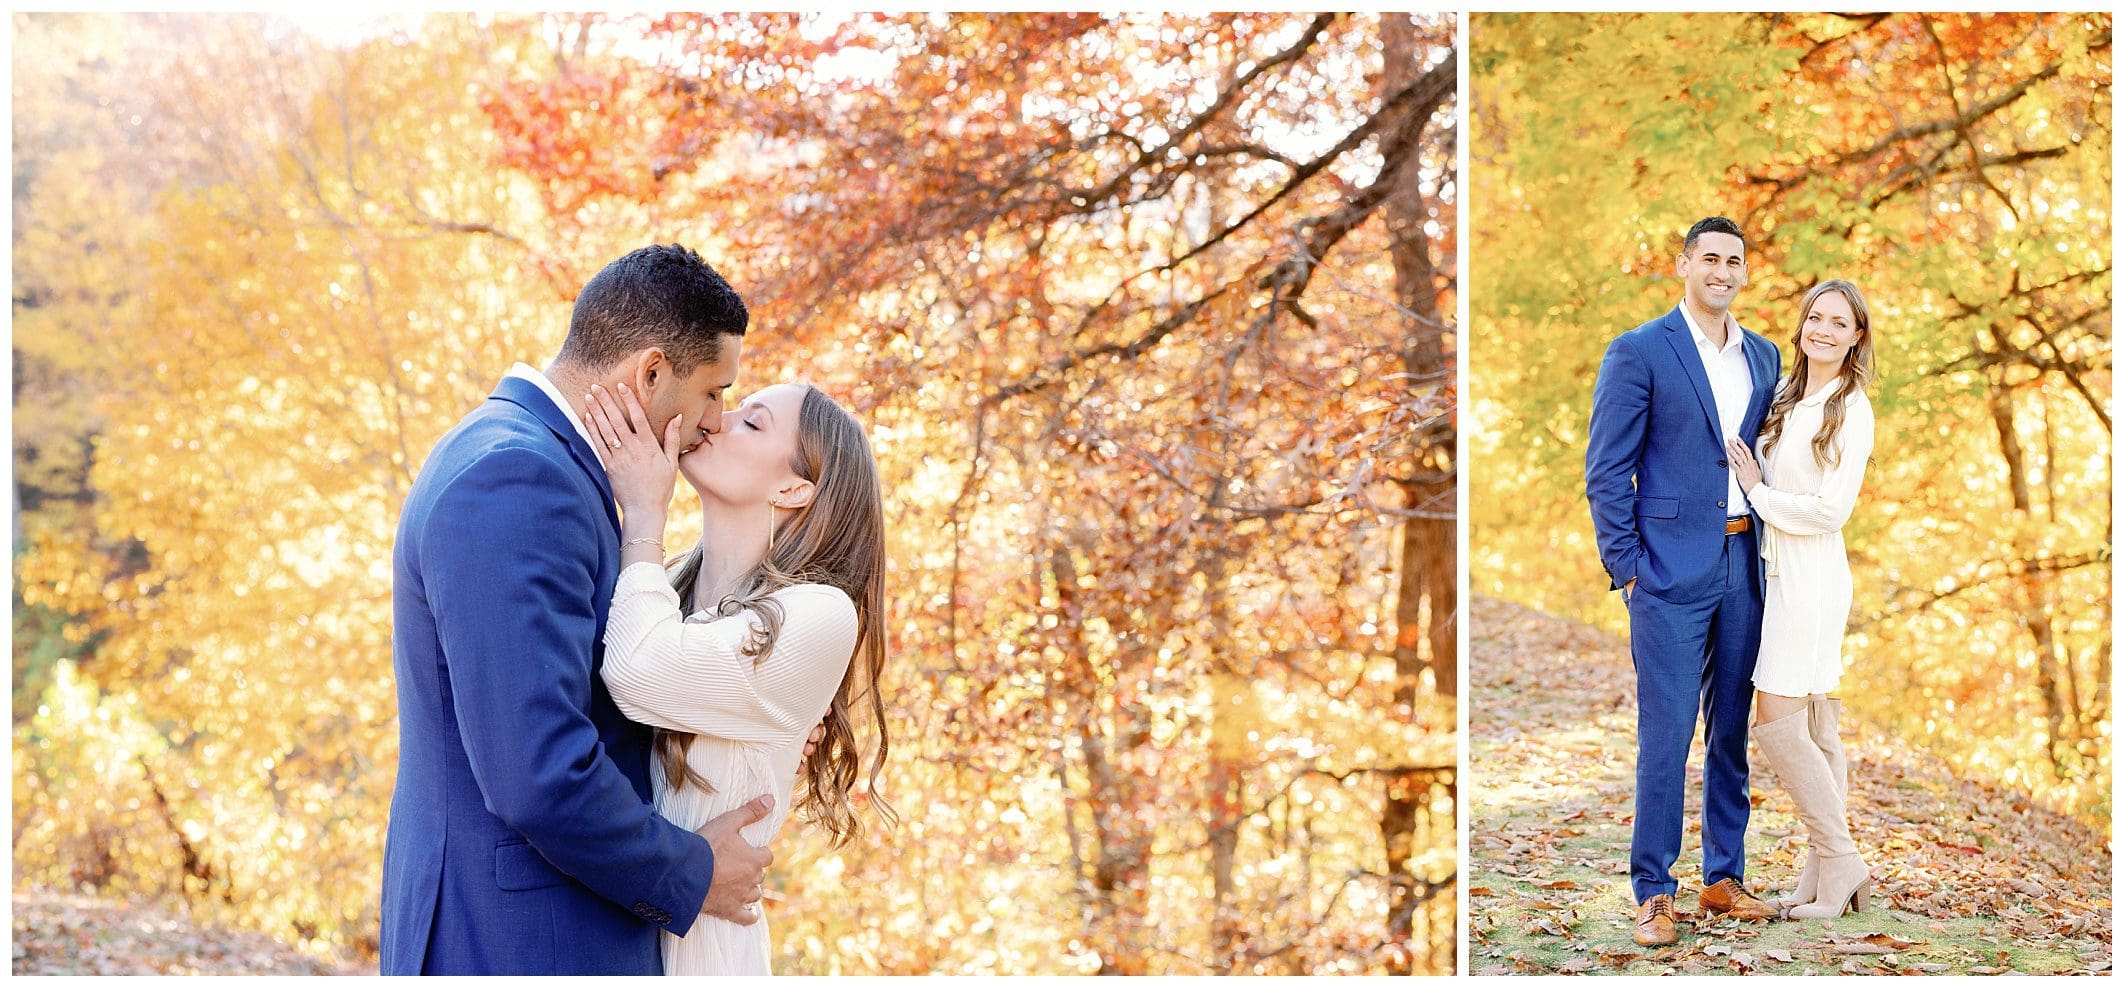 A couple sharing a sunrise kiss in an autumnal setting and posing with fall foliage in the background.